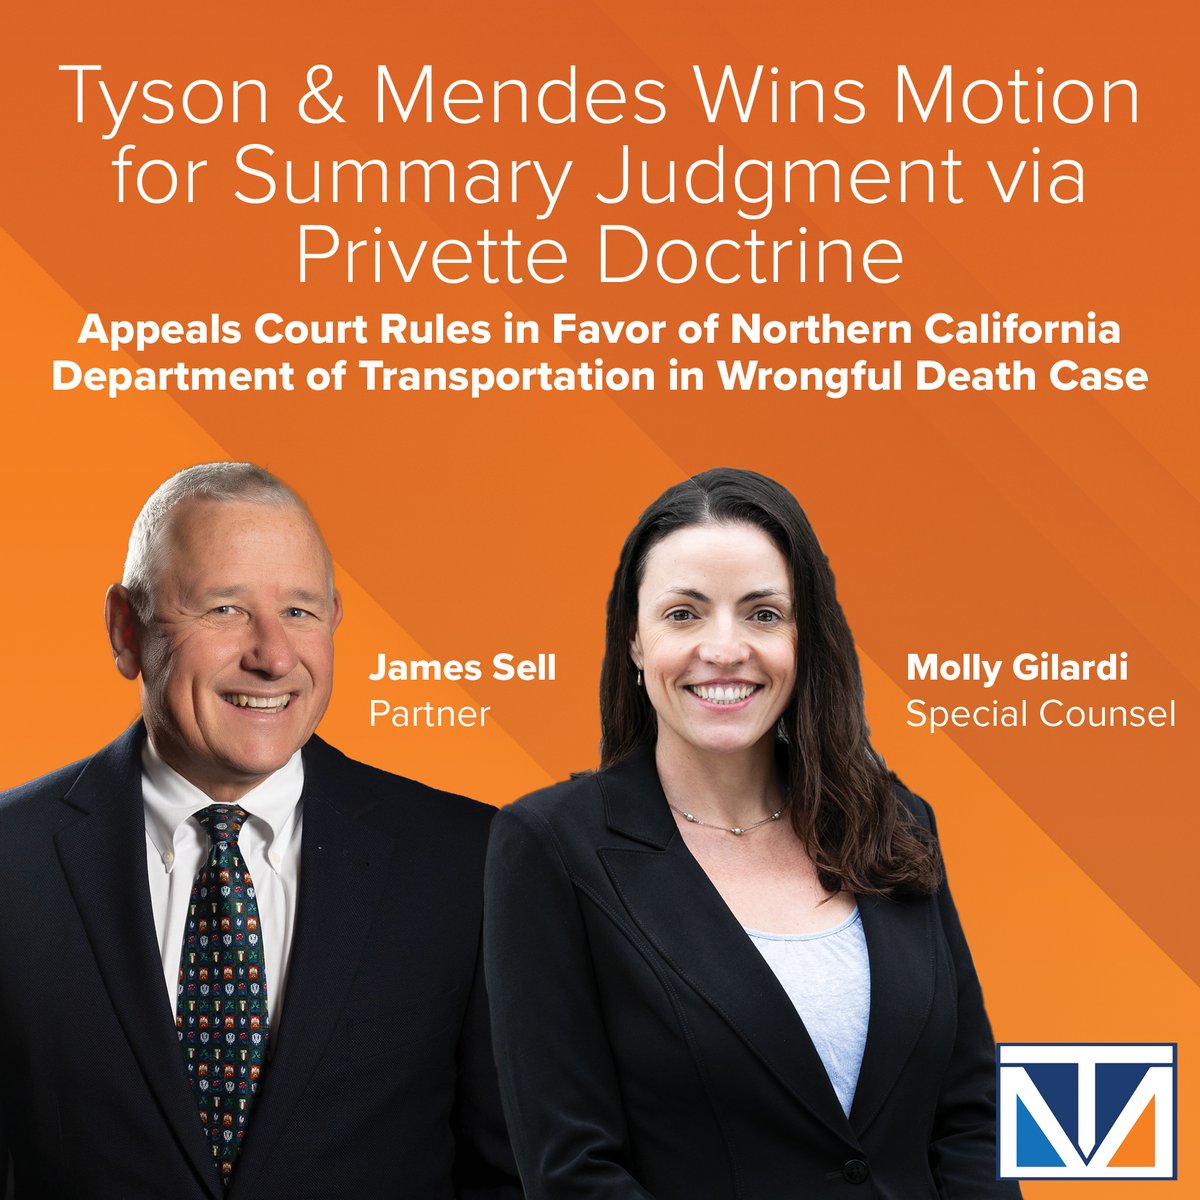 Congratulations to @tysonmendes Partner Jim Sell and Special Counsel Mollly Gilardi for their Motion for Summary Judgment win and published Privette Opinion with the First District Court of Appeal. hubs.la/Q01H24Yx0...

#TysonMendes #CaliforniaLaw